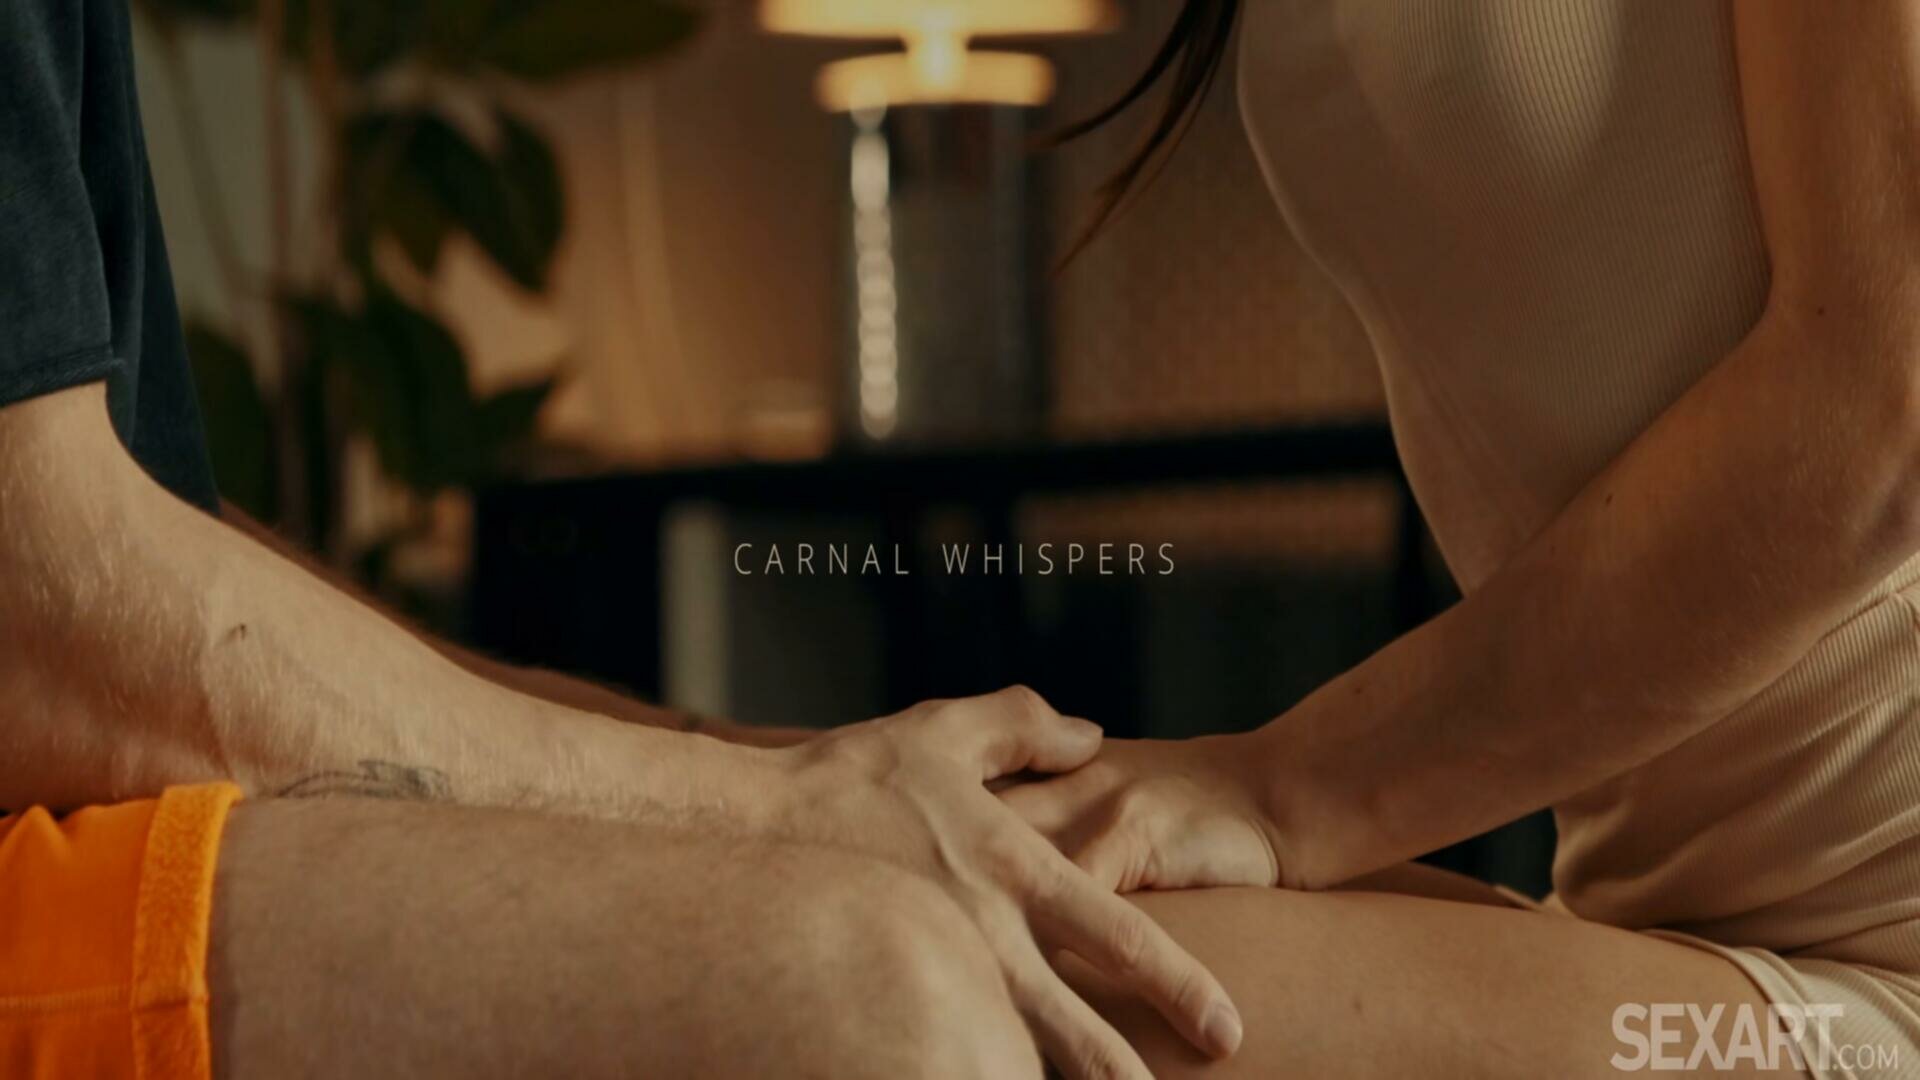 SexArt 24 04 24 Candie Luciani Carnal Whispers XXX 1080p HEVC x265 PRT XvX